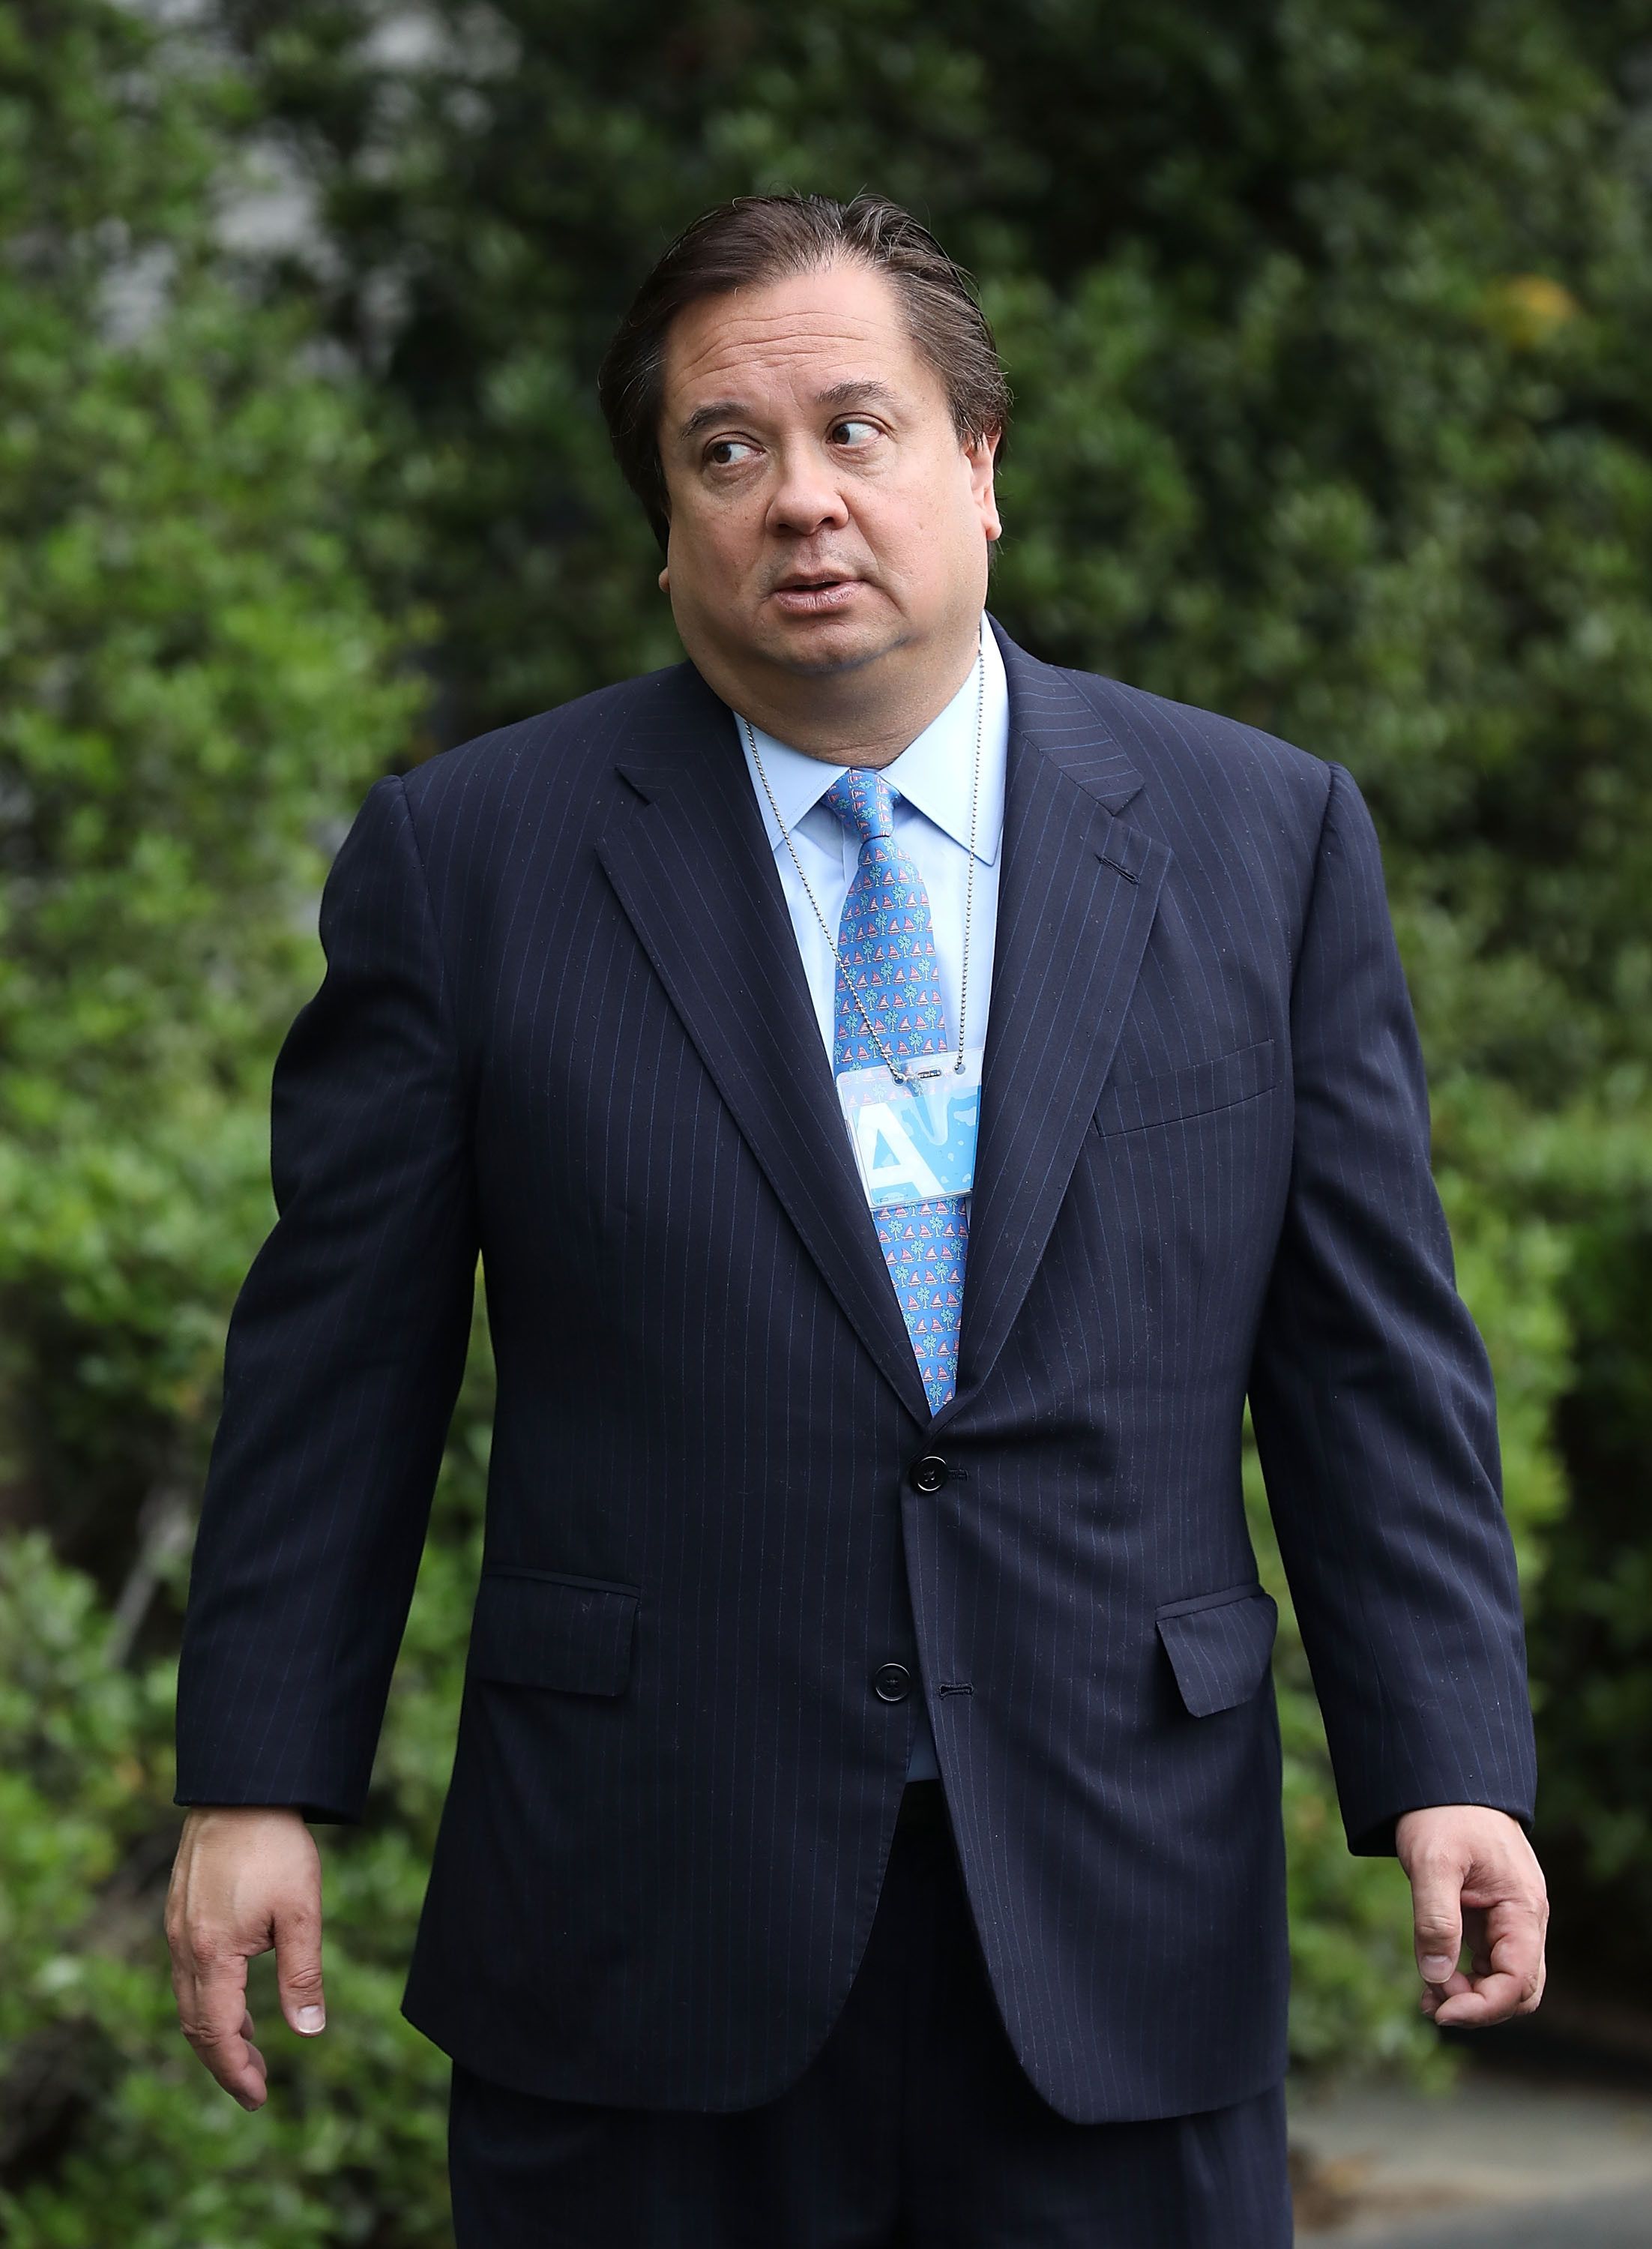 George Conway is a founding member of a conservative PAC against Trump